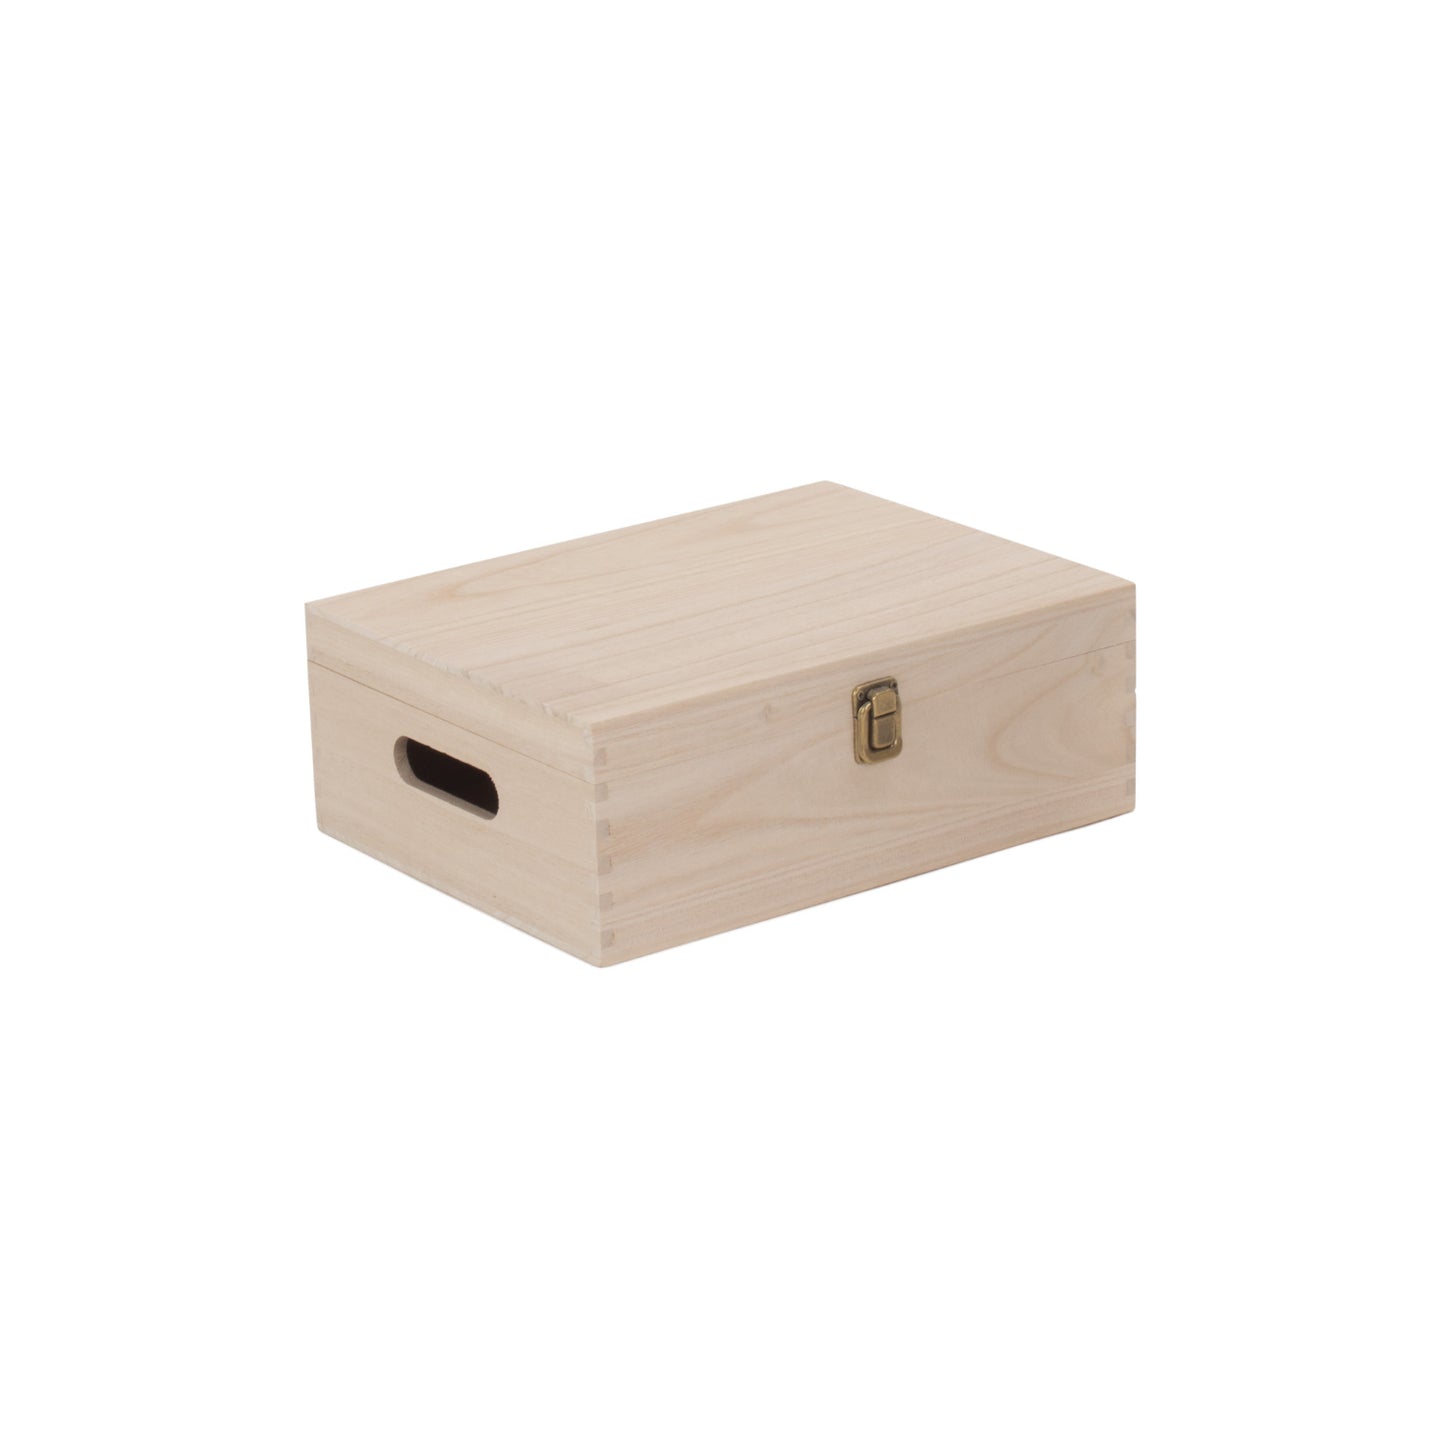 12 Inch Unvarnished Wooden Box